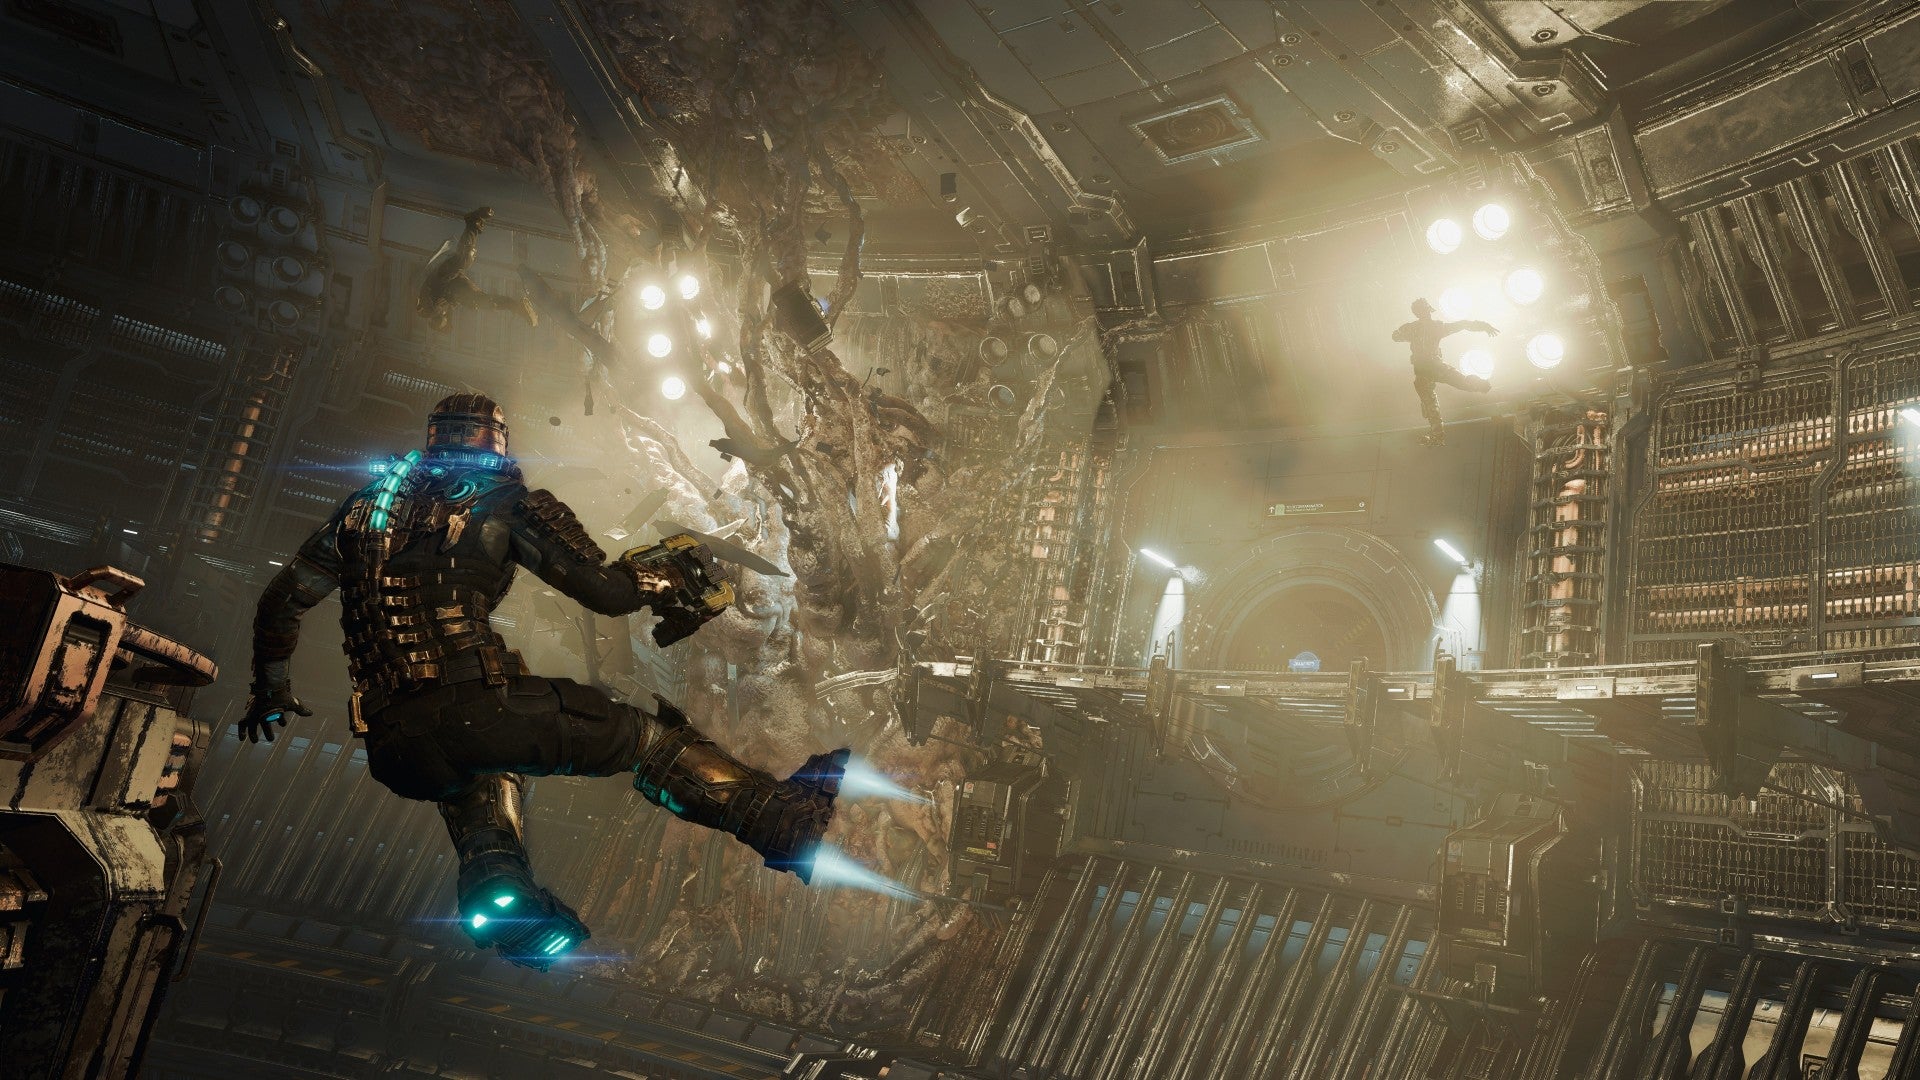 The Dead Space remake is being developed by EA's Motive Studios, and releases on January 27th, 2023.